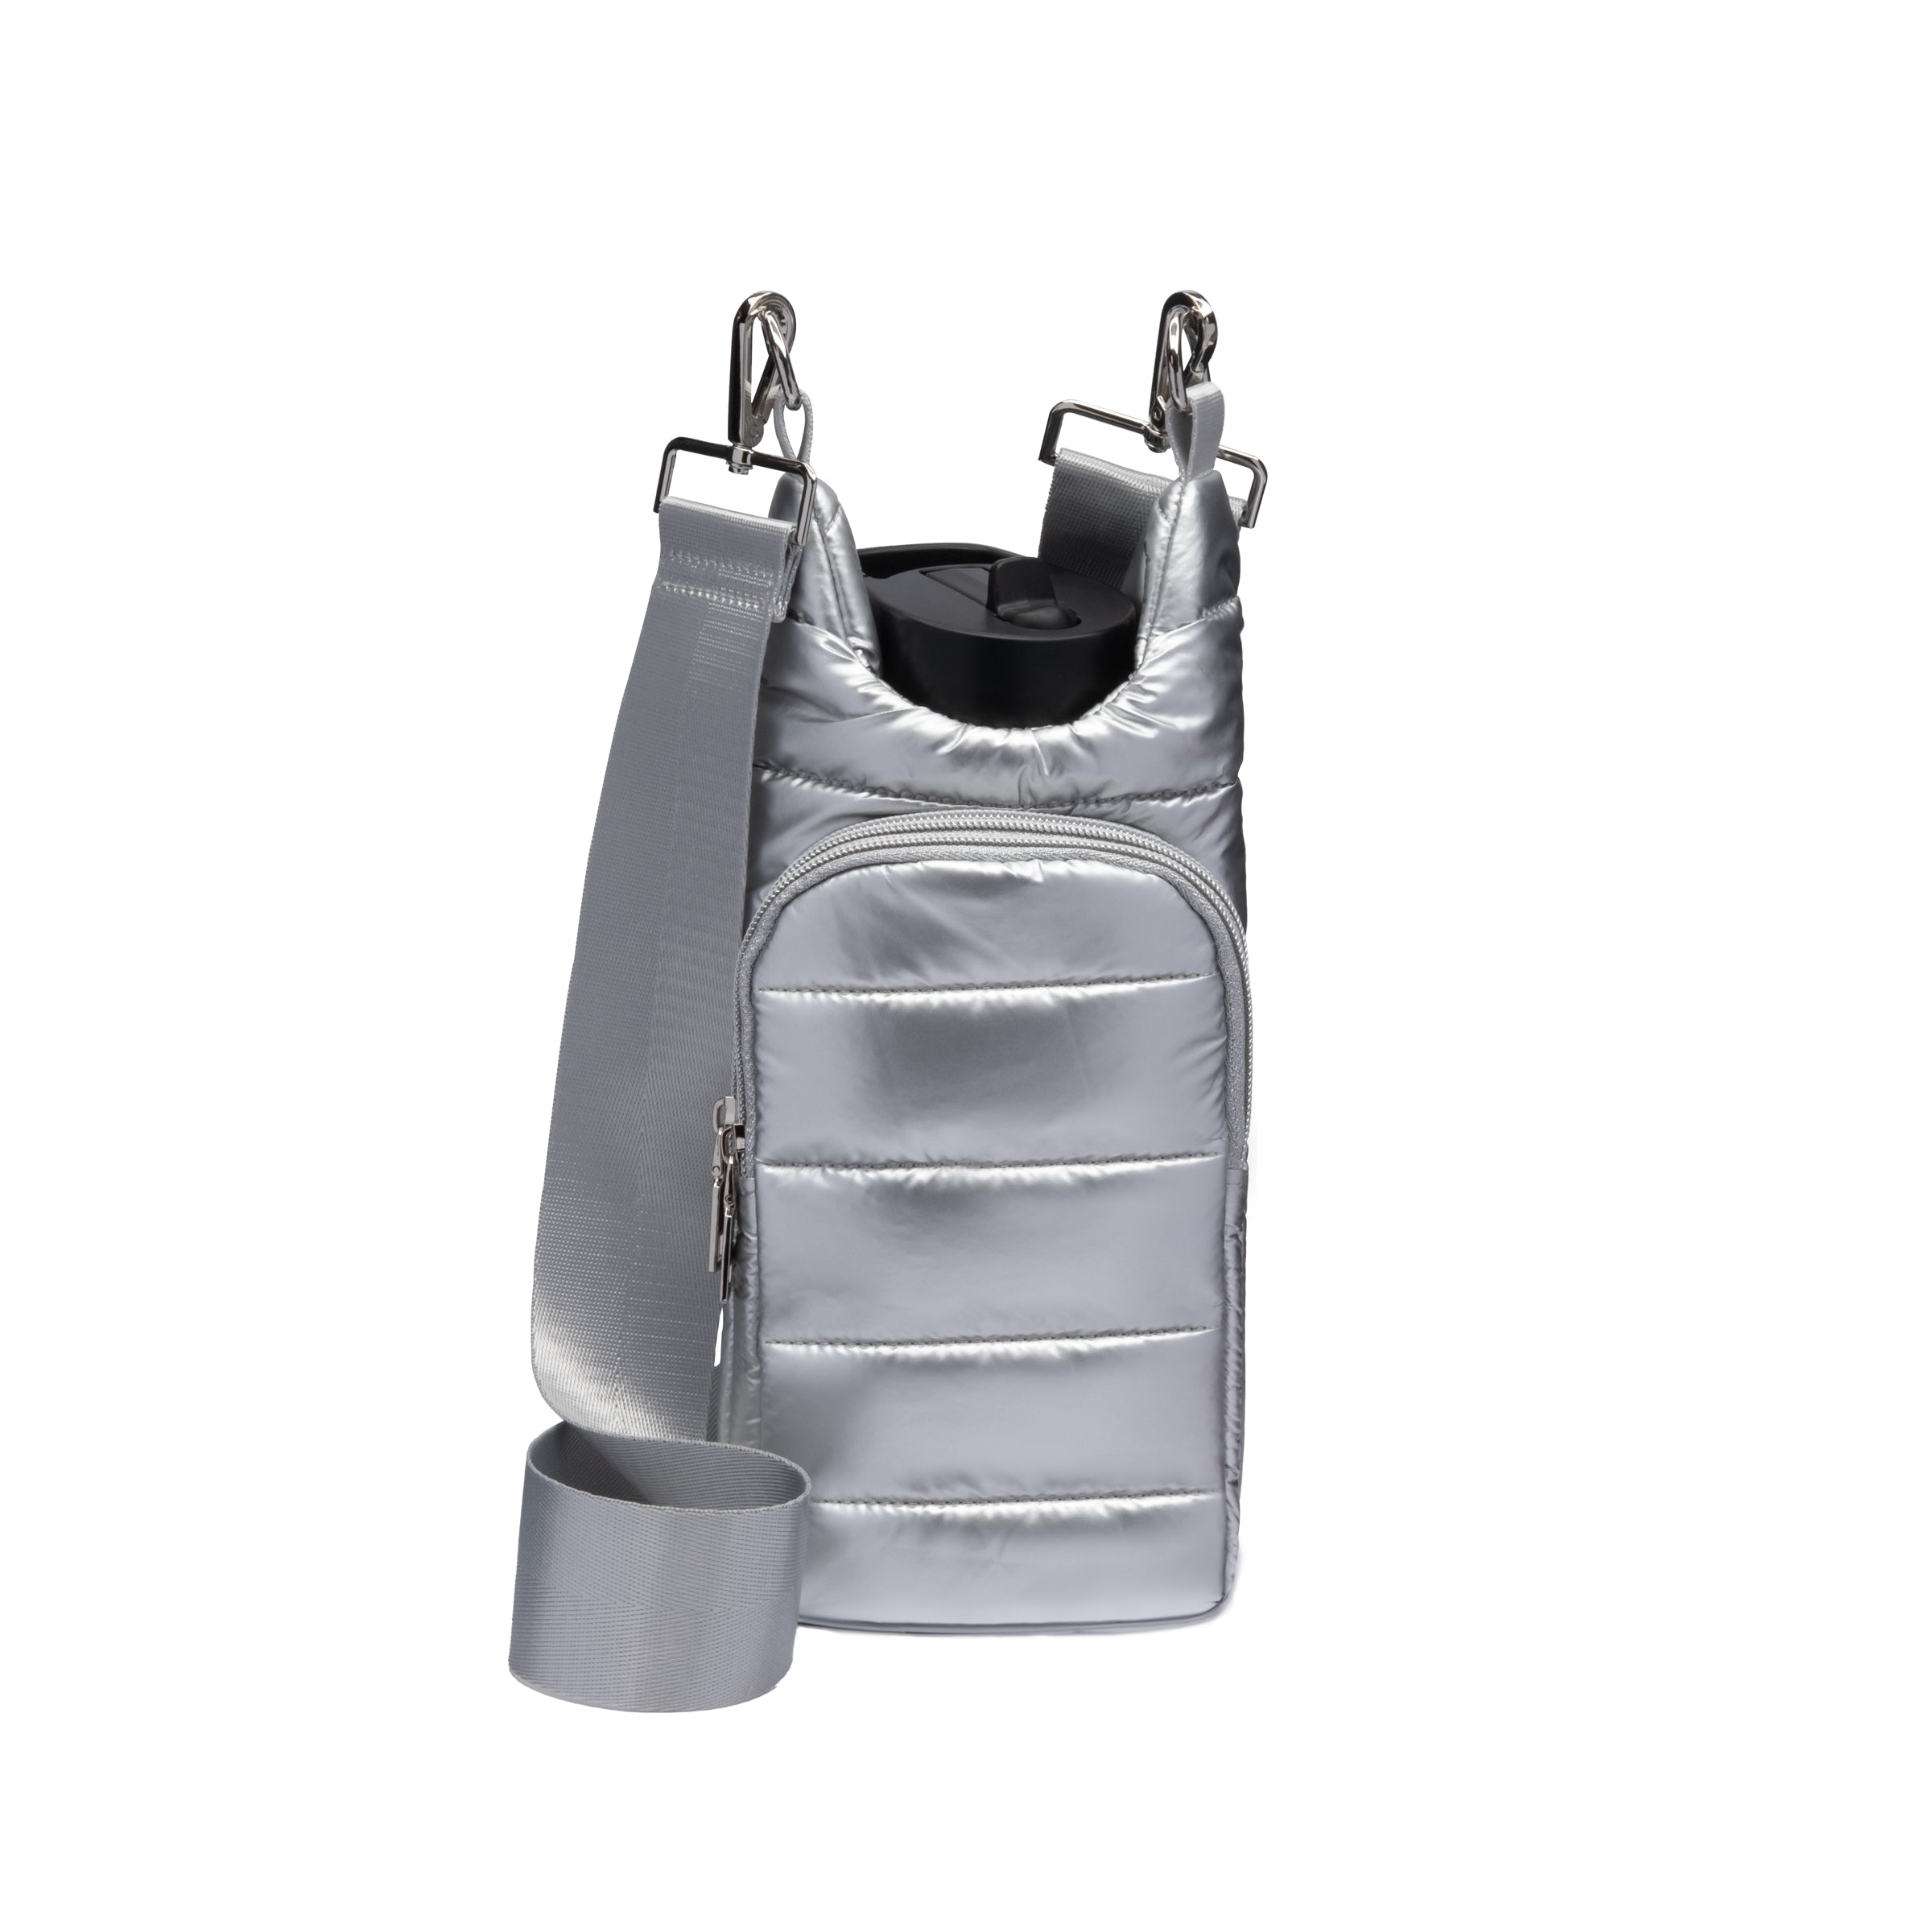 Silver Shiny HydroBag with Solid Silver Strap